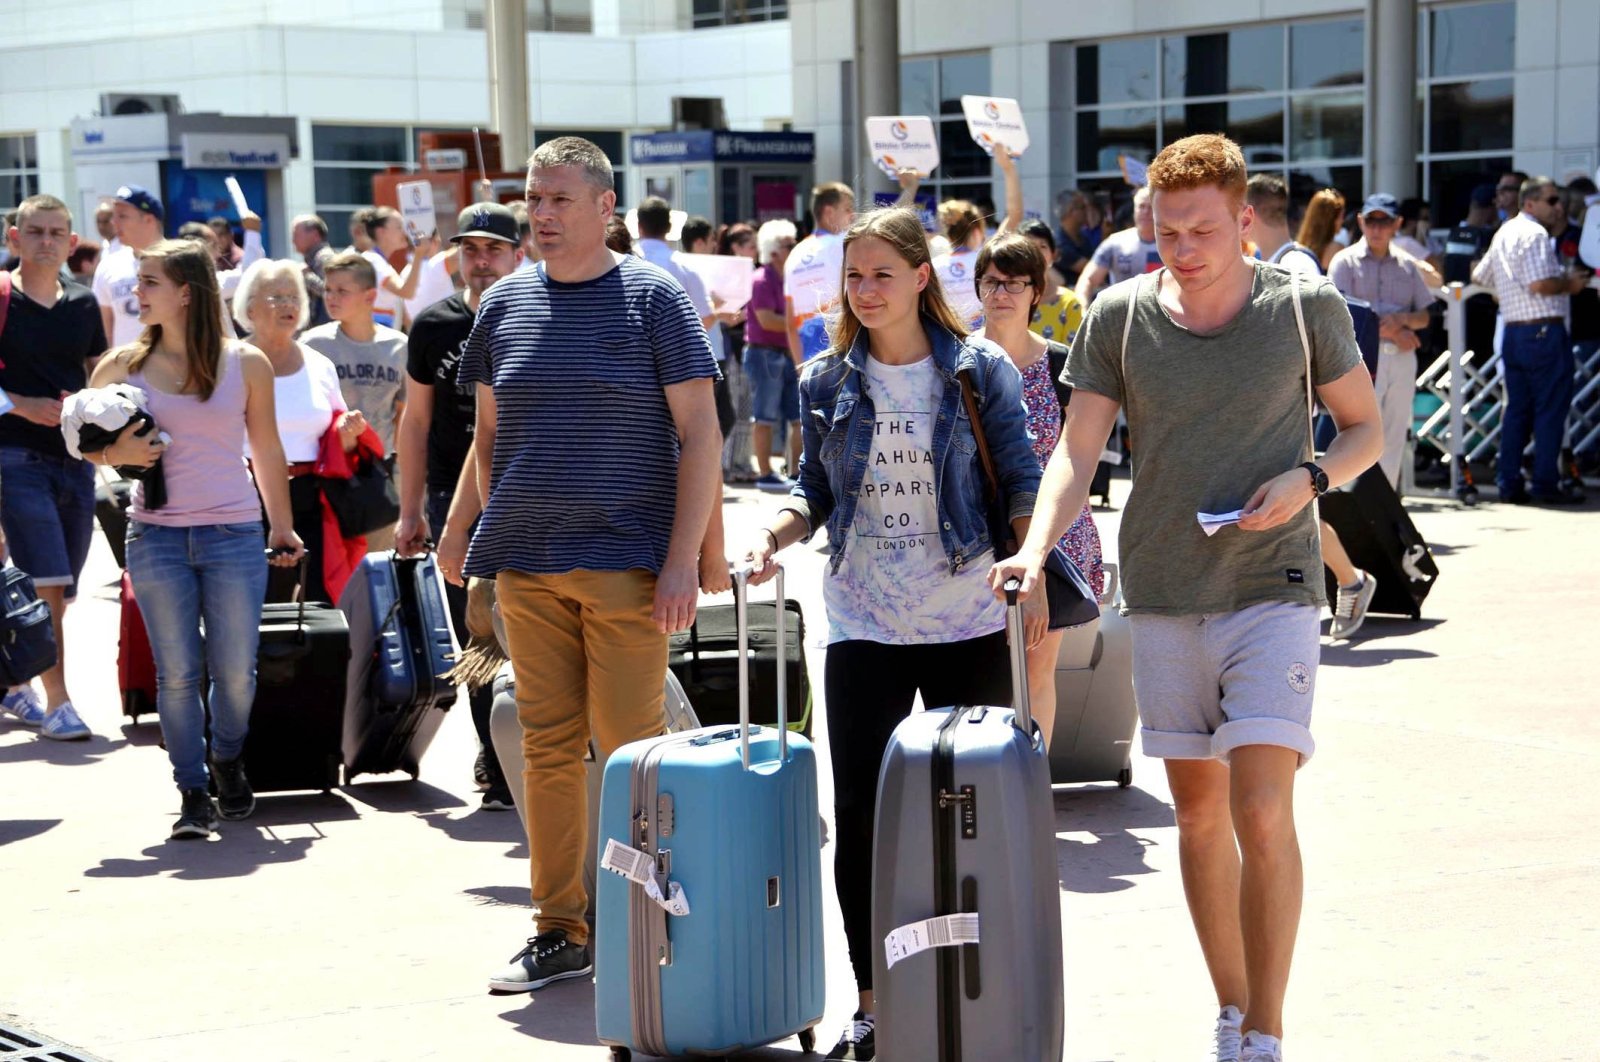 Russian tourists arrive at an airport in Antalya province, southern Turkey, April 11, 2017. (DHA Photo)